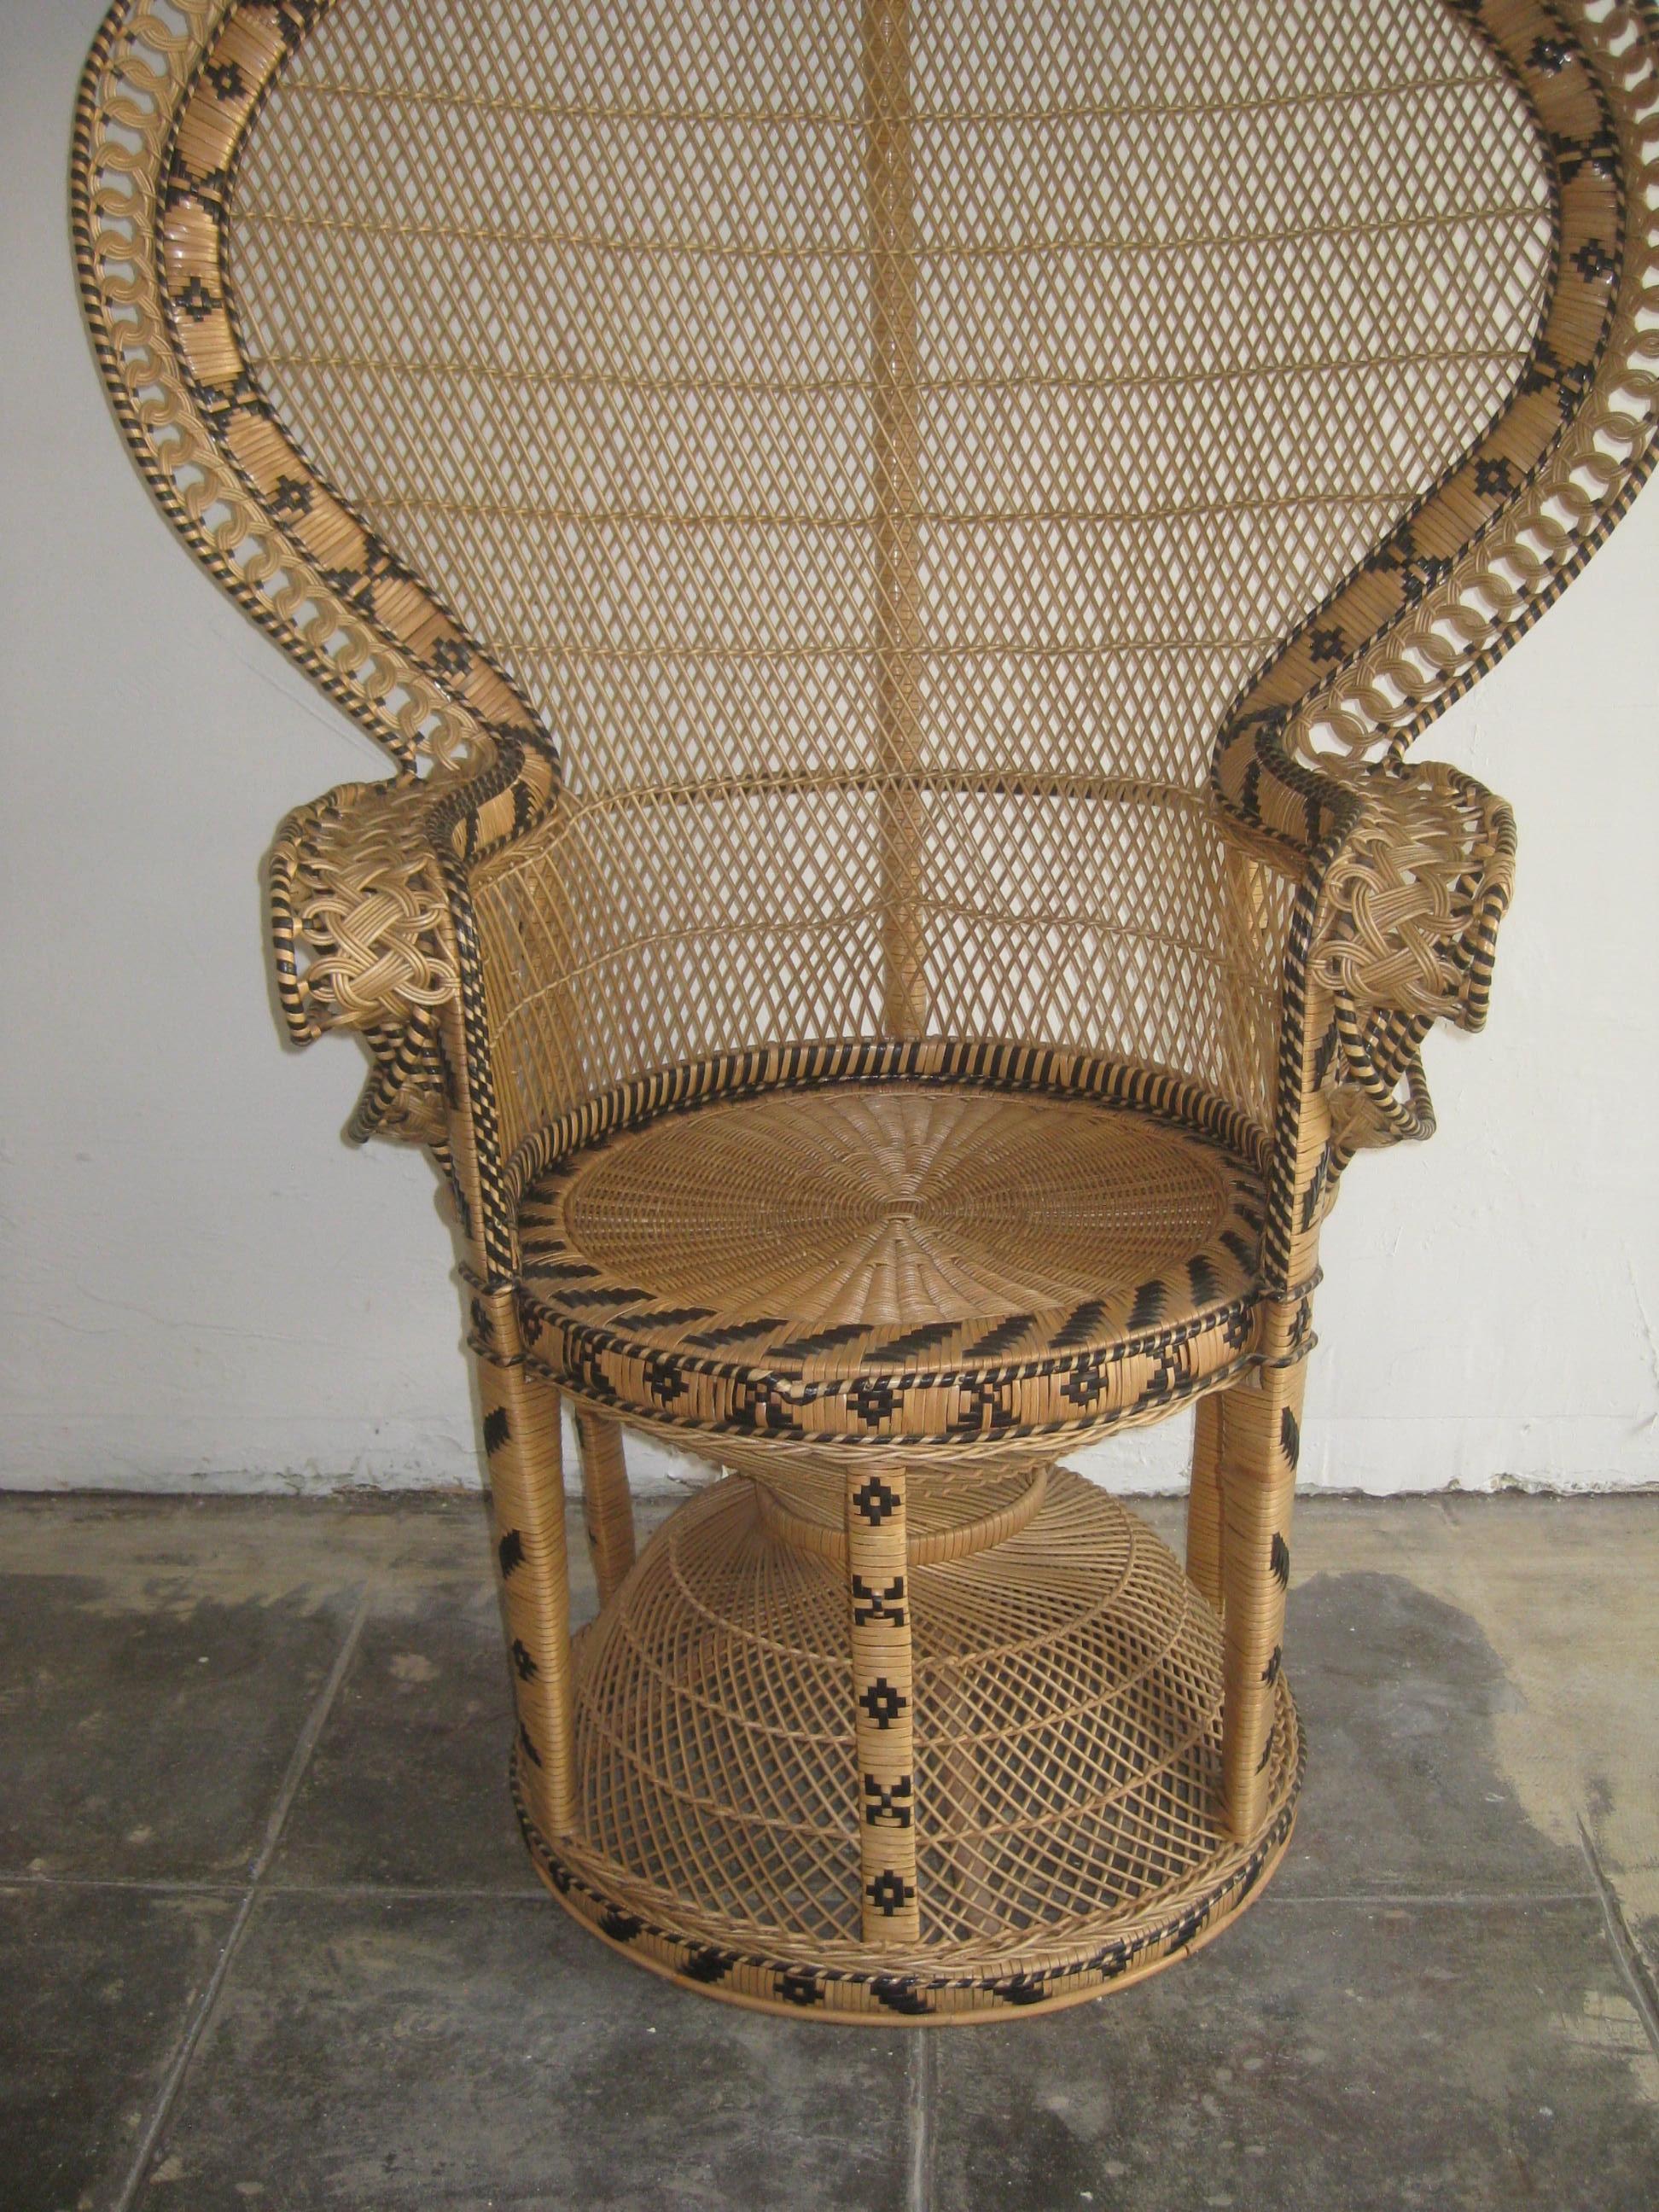 Iconic Emmanuelle wicker and rattan midcentury peacock chair. This chair is a statement piece and in mint condition. It has no broken, no brittle or repaired pieces. Displays well and is very strong. The color is awesome and would work in any